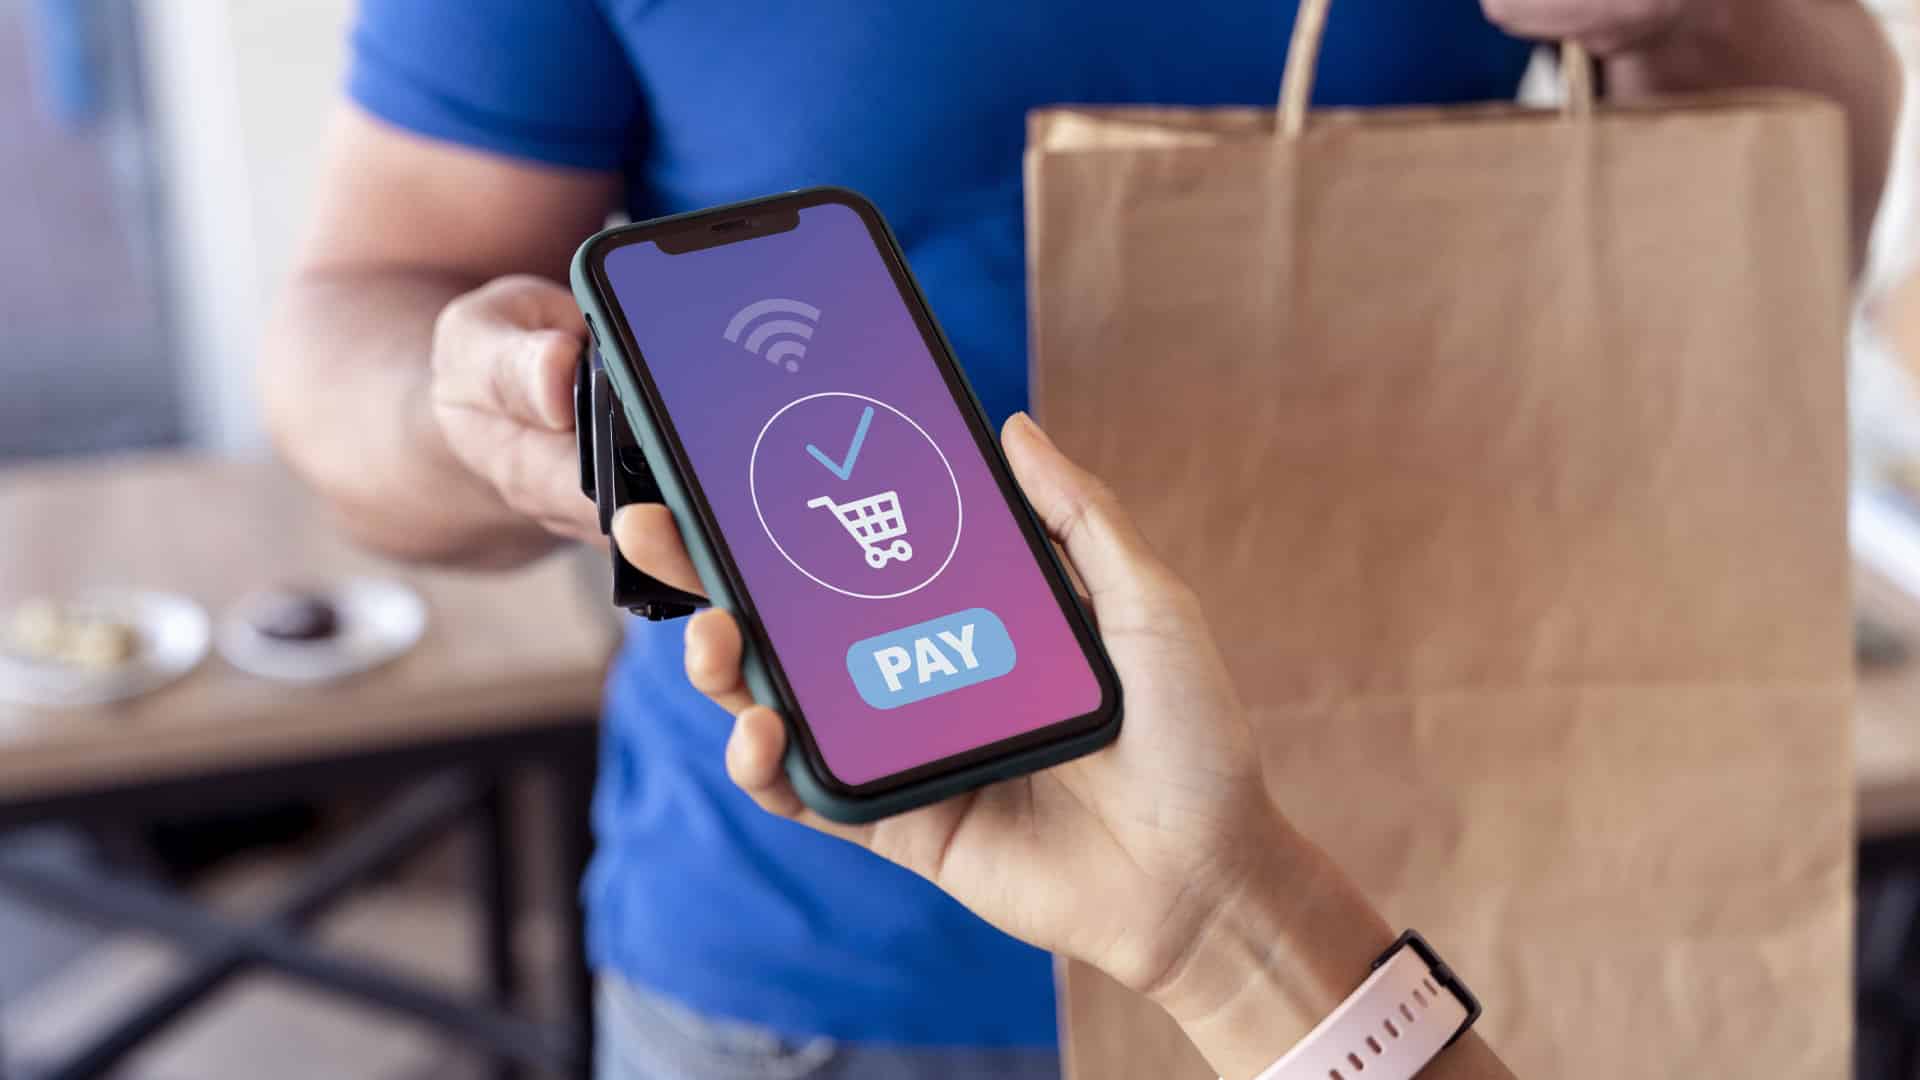 Evaluating RBI's Payments Guidelines - Empower India's Take on the Future of Digital Payments in India